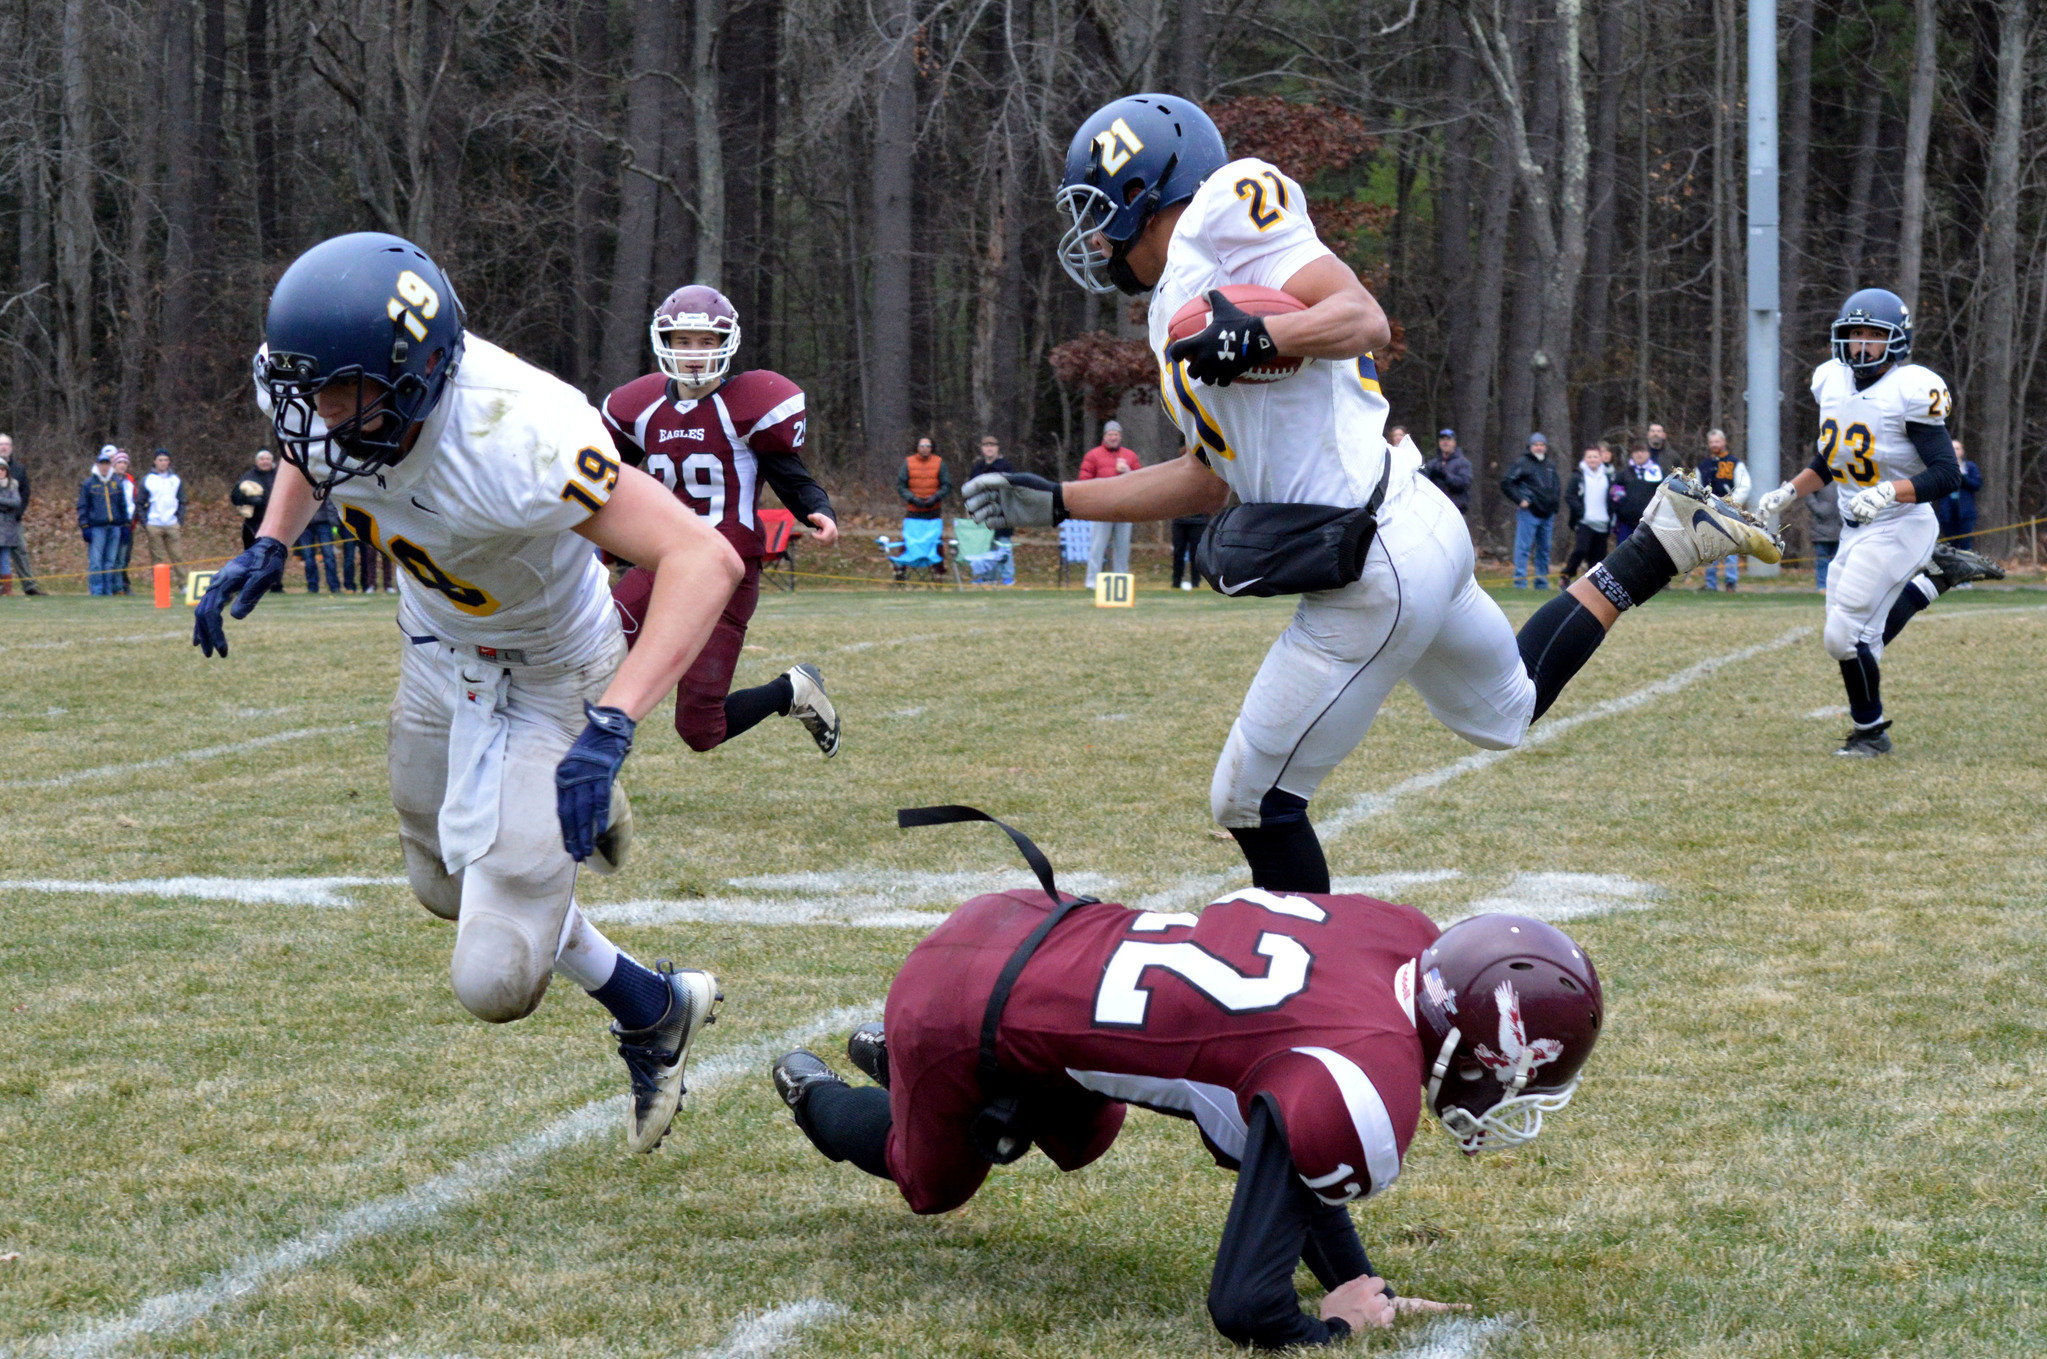 Western Mass. Thanksgiving Football: Where do the rivalries stand